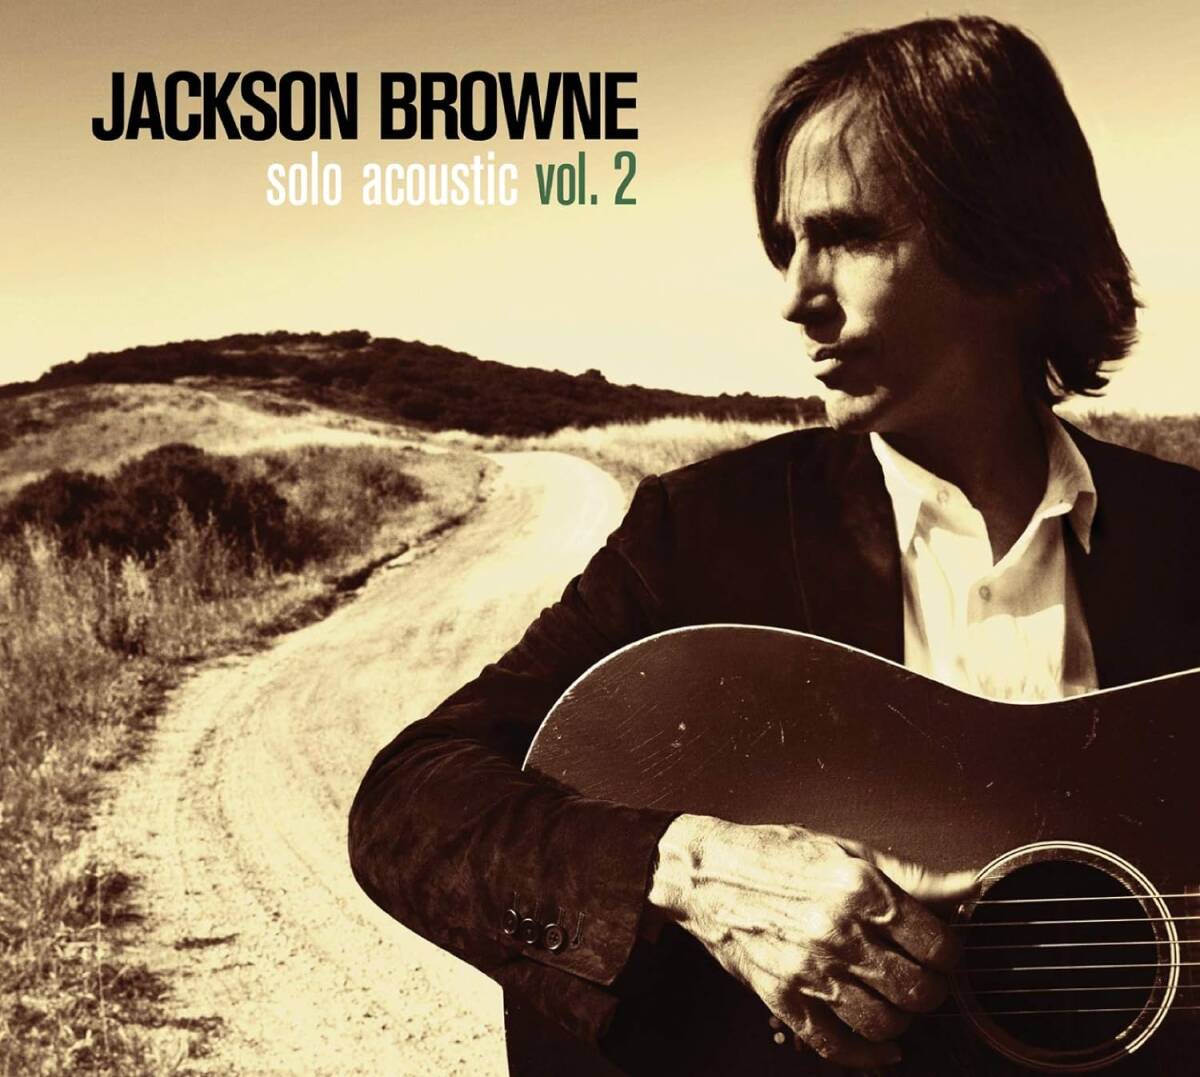 Solo Acoustic 2 (Dig) ジャクソン・ブラウン　輸入盤CD_画像1